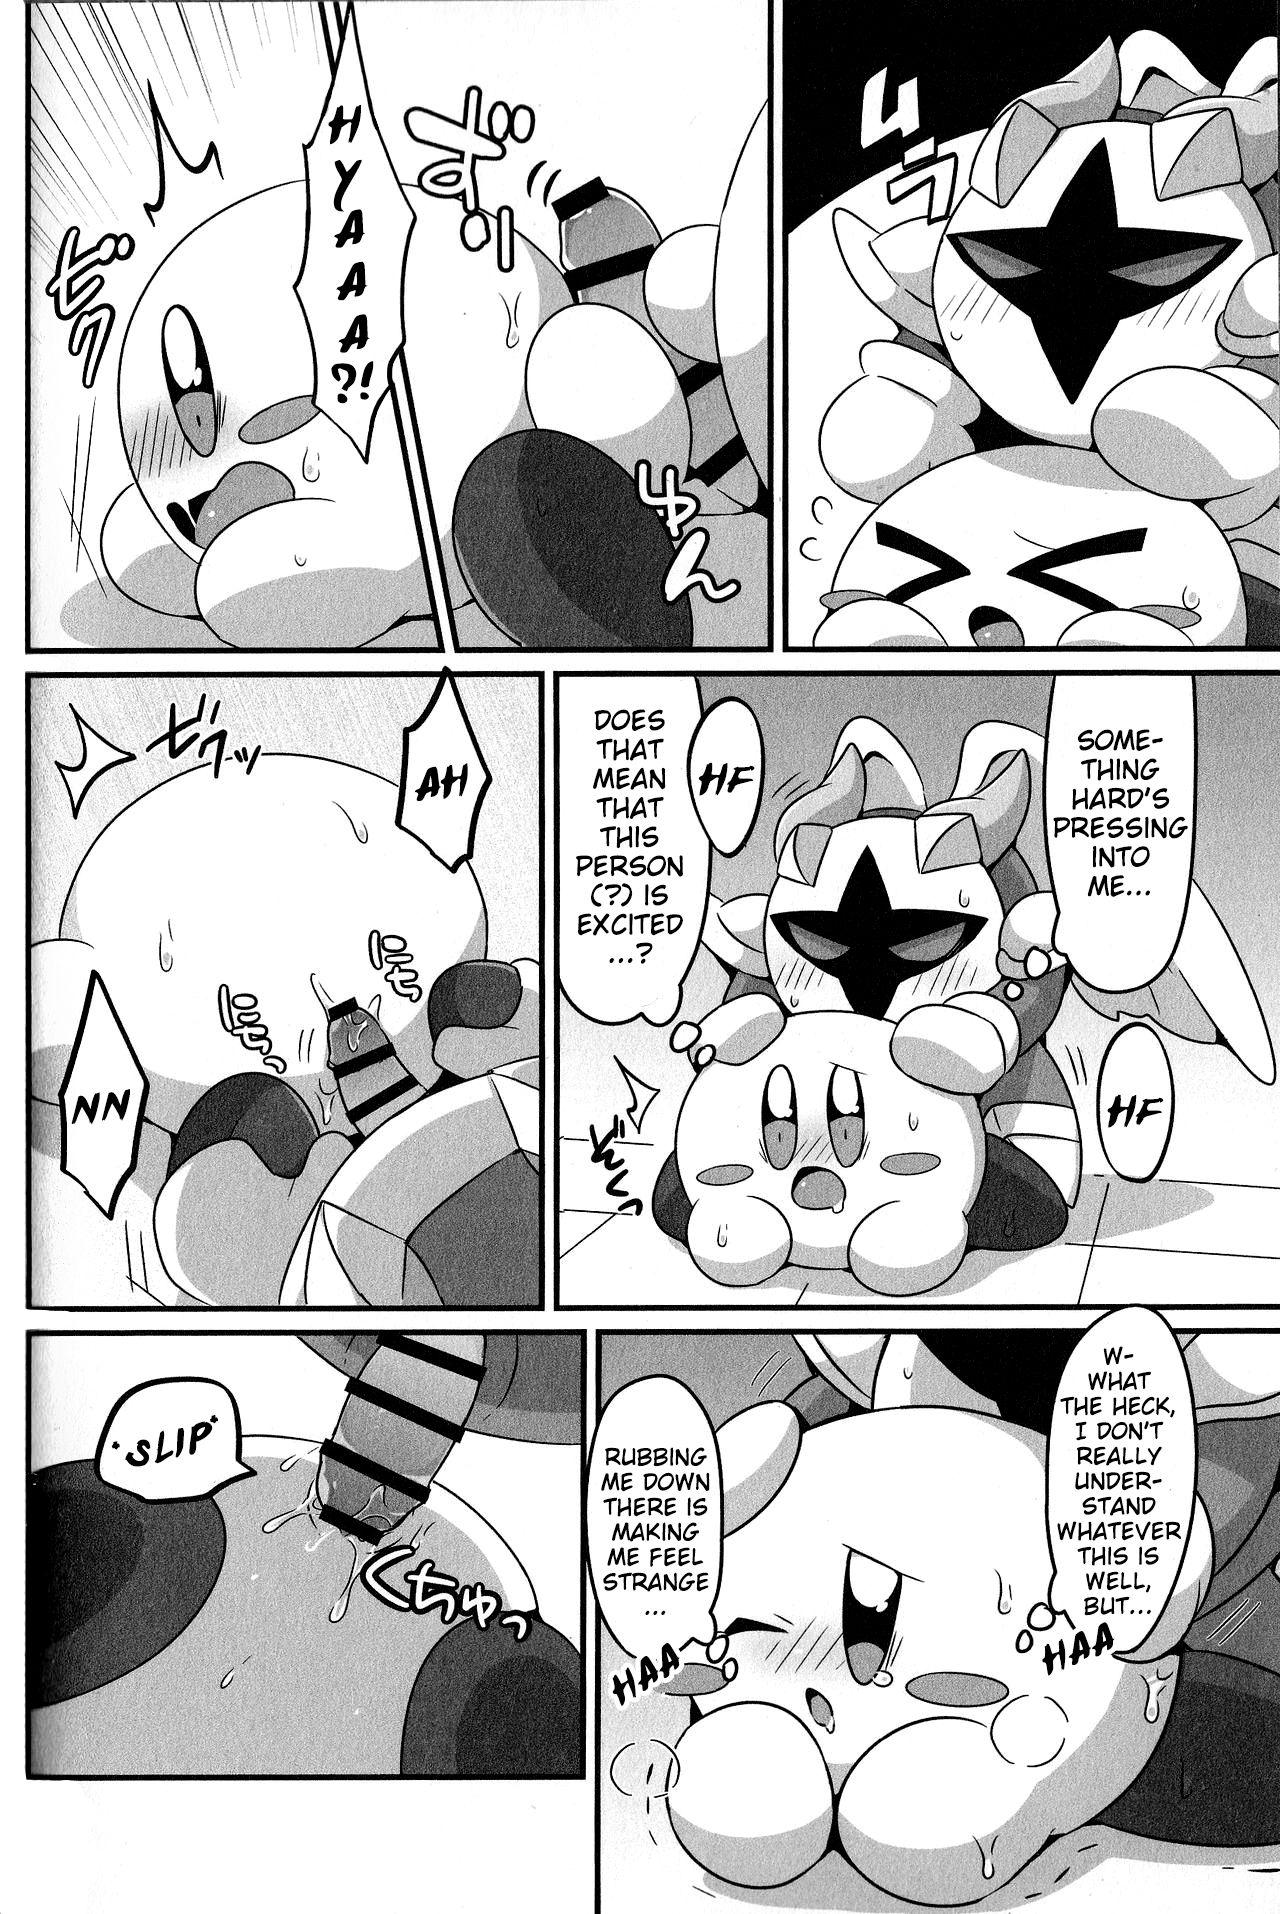 Hot Wife I Want to Do XXX Even For Spheres! - Kirby Francaise - Page 5